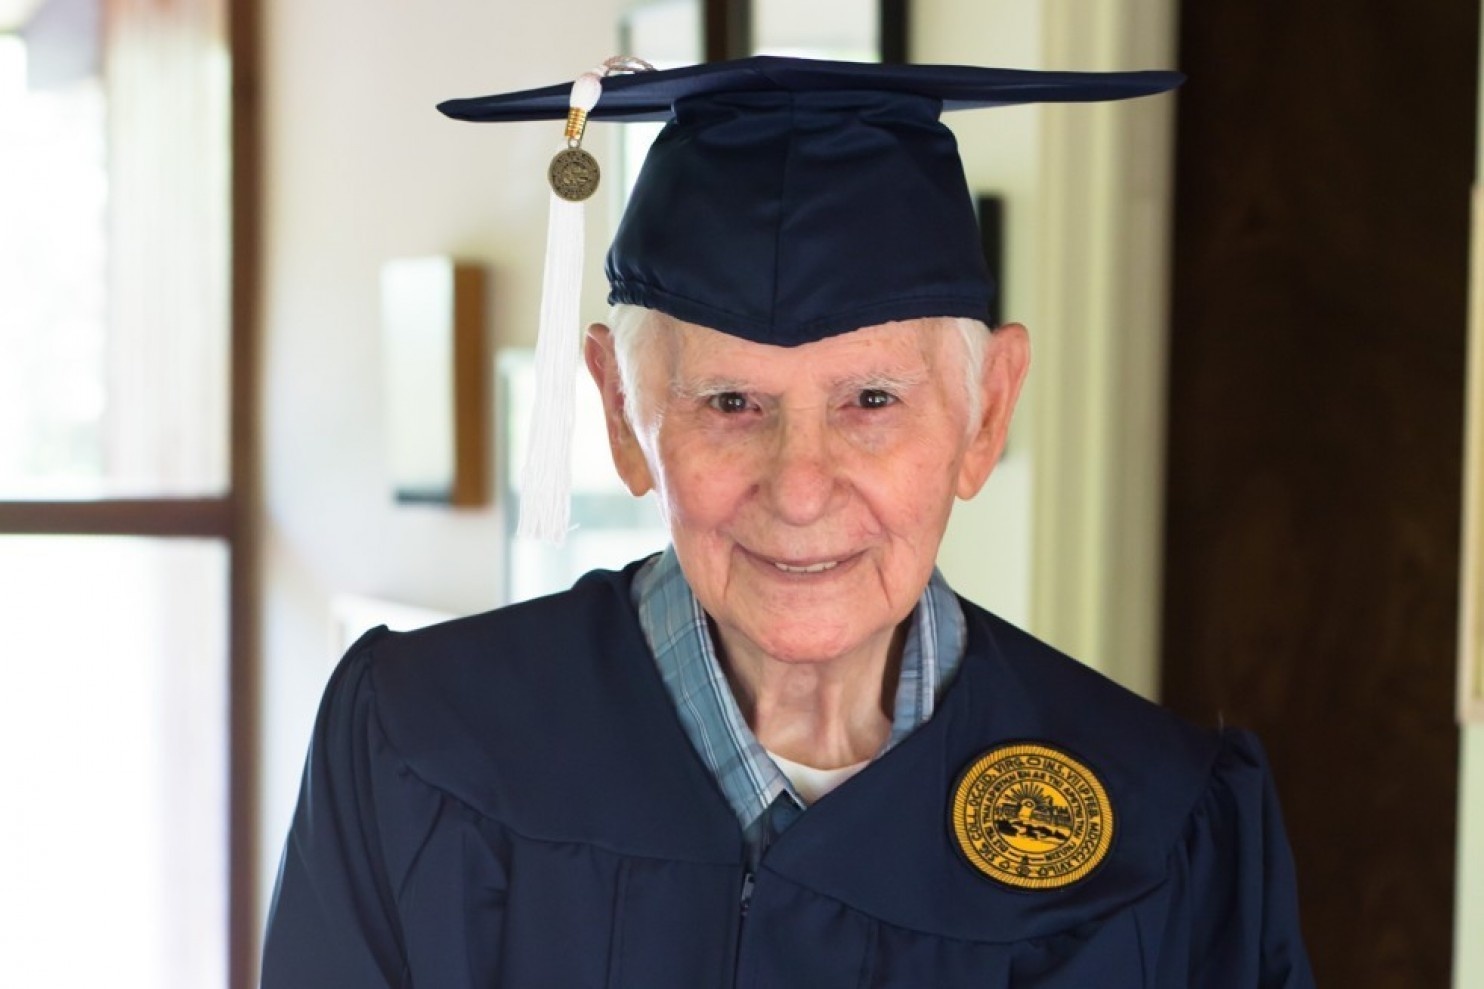 World War II vet, Anthony Brutto, graduates from college at the age of 94.